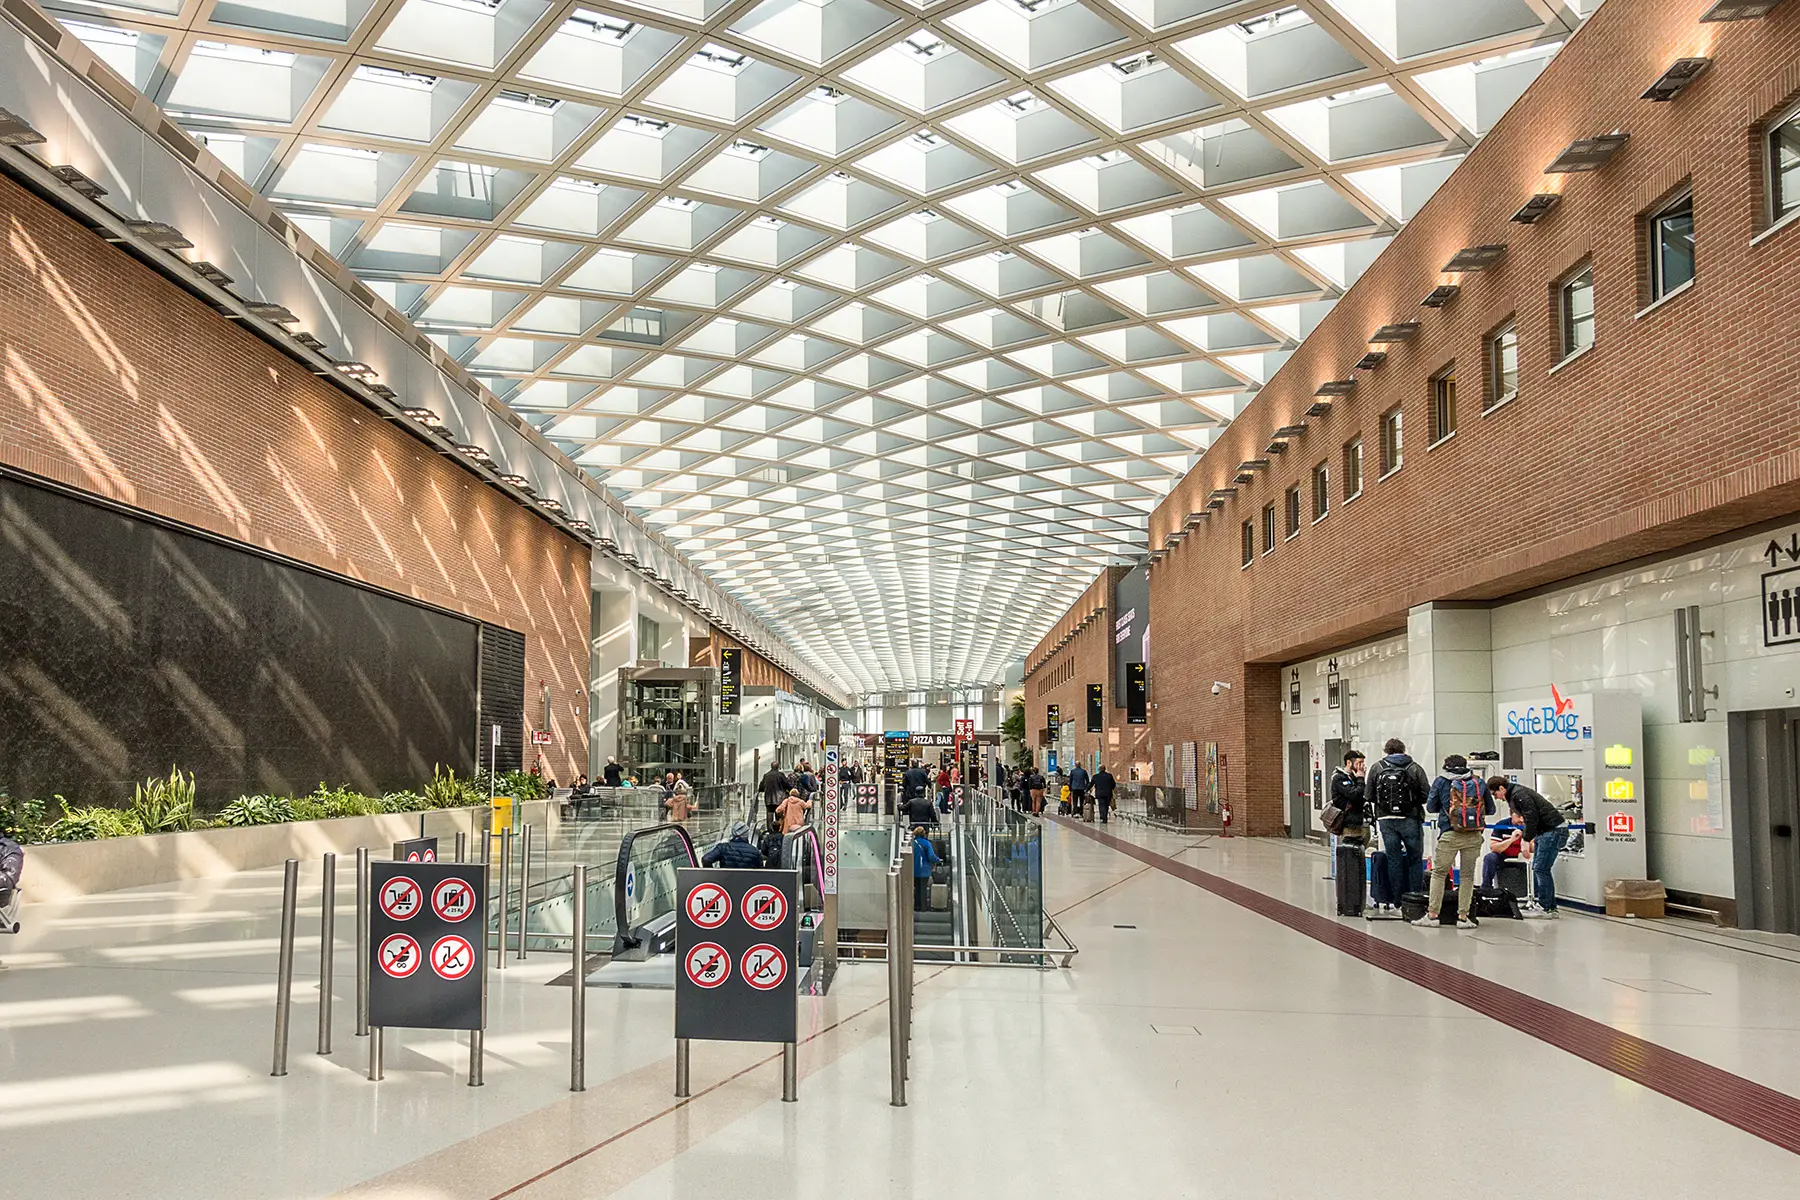 Interior of Marco Polo International Airport, Venice with glass ceiling